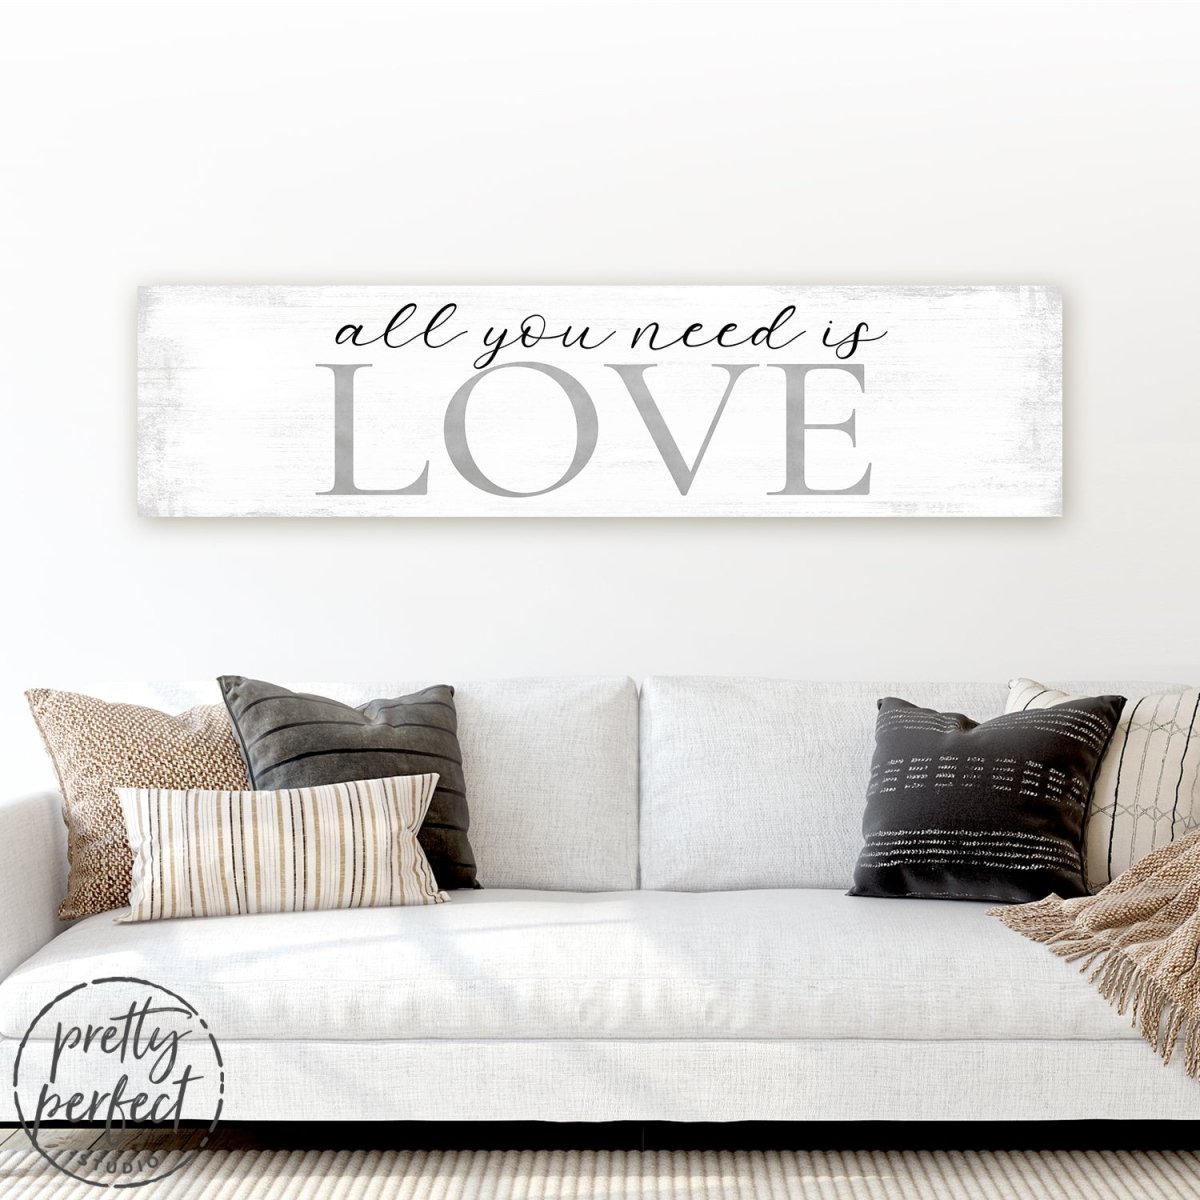 All You Need Is Love Canvas Wall Art Above Couch - Pretty Perfect Studio